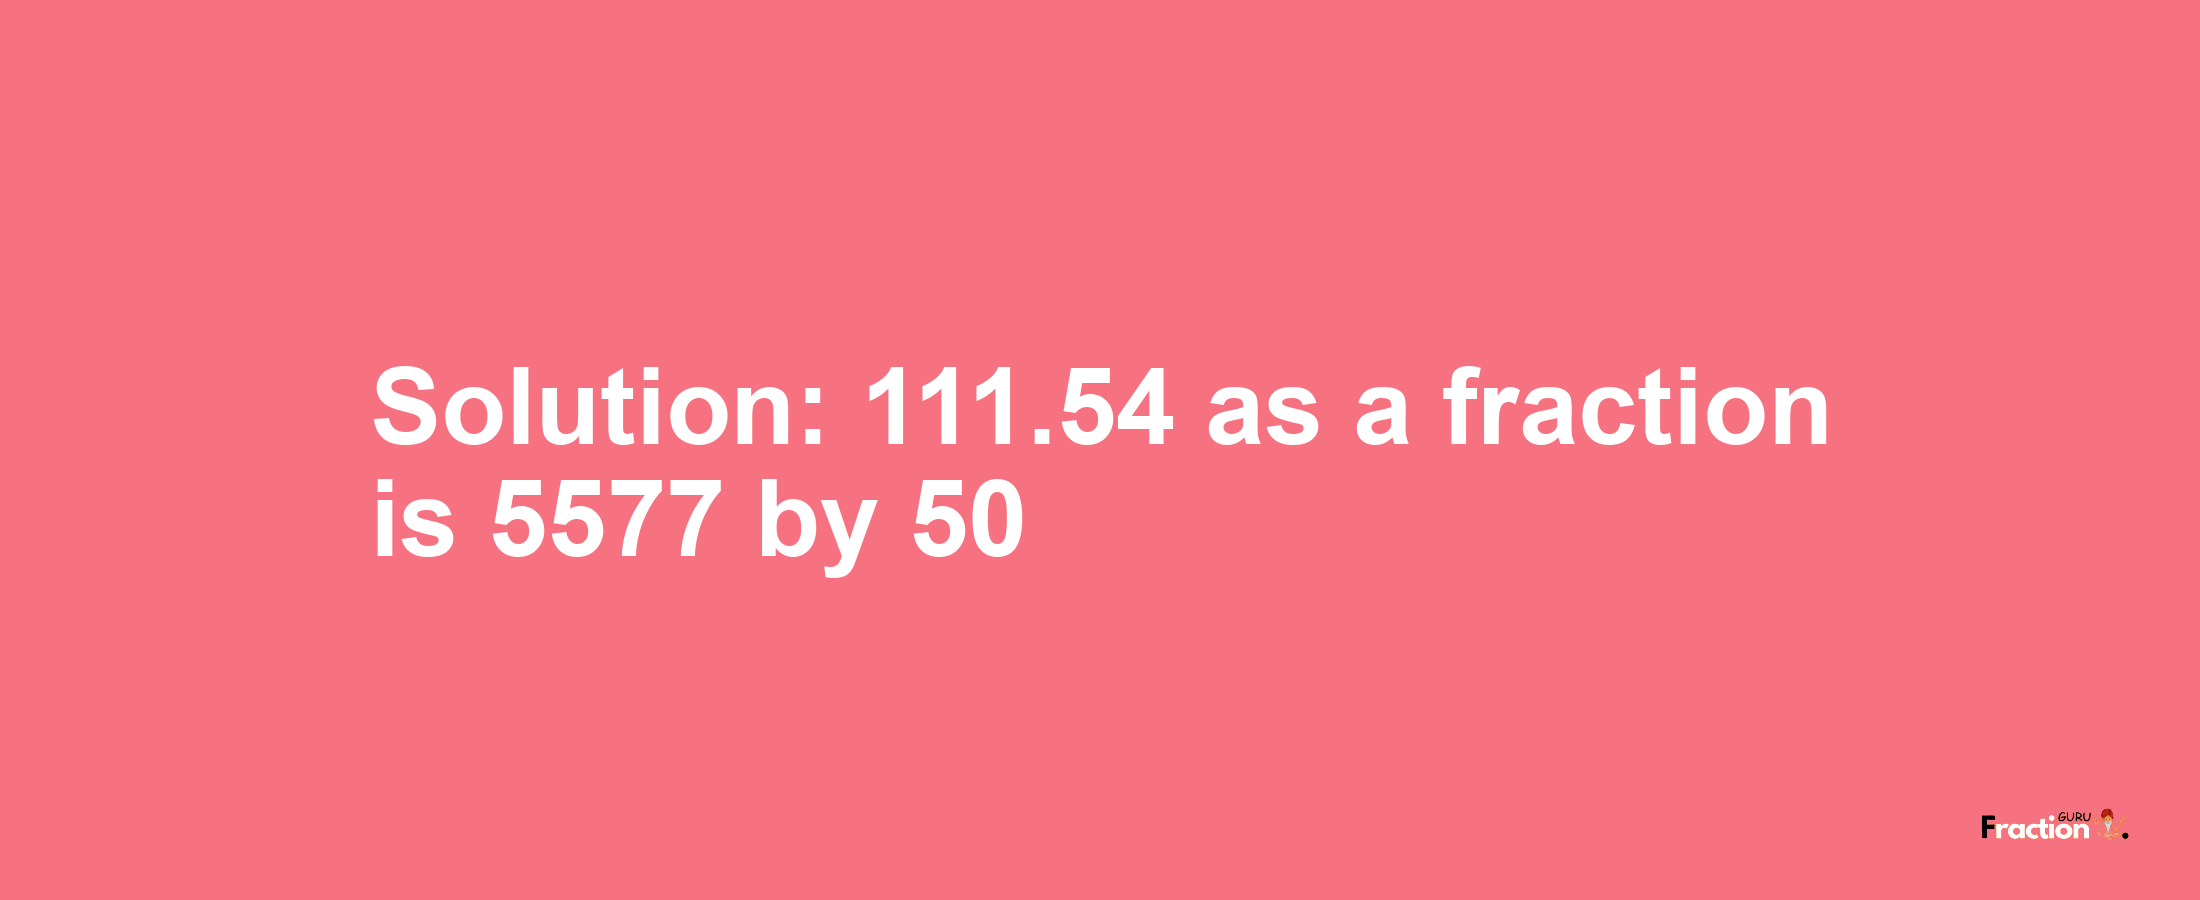 Solution:111.54 as a fraction is 5577/50